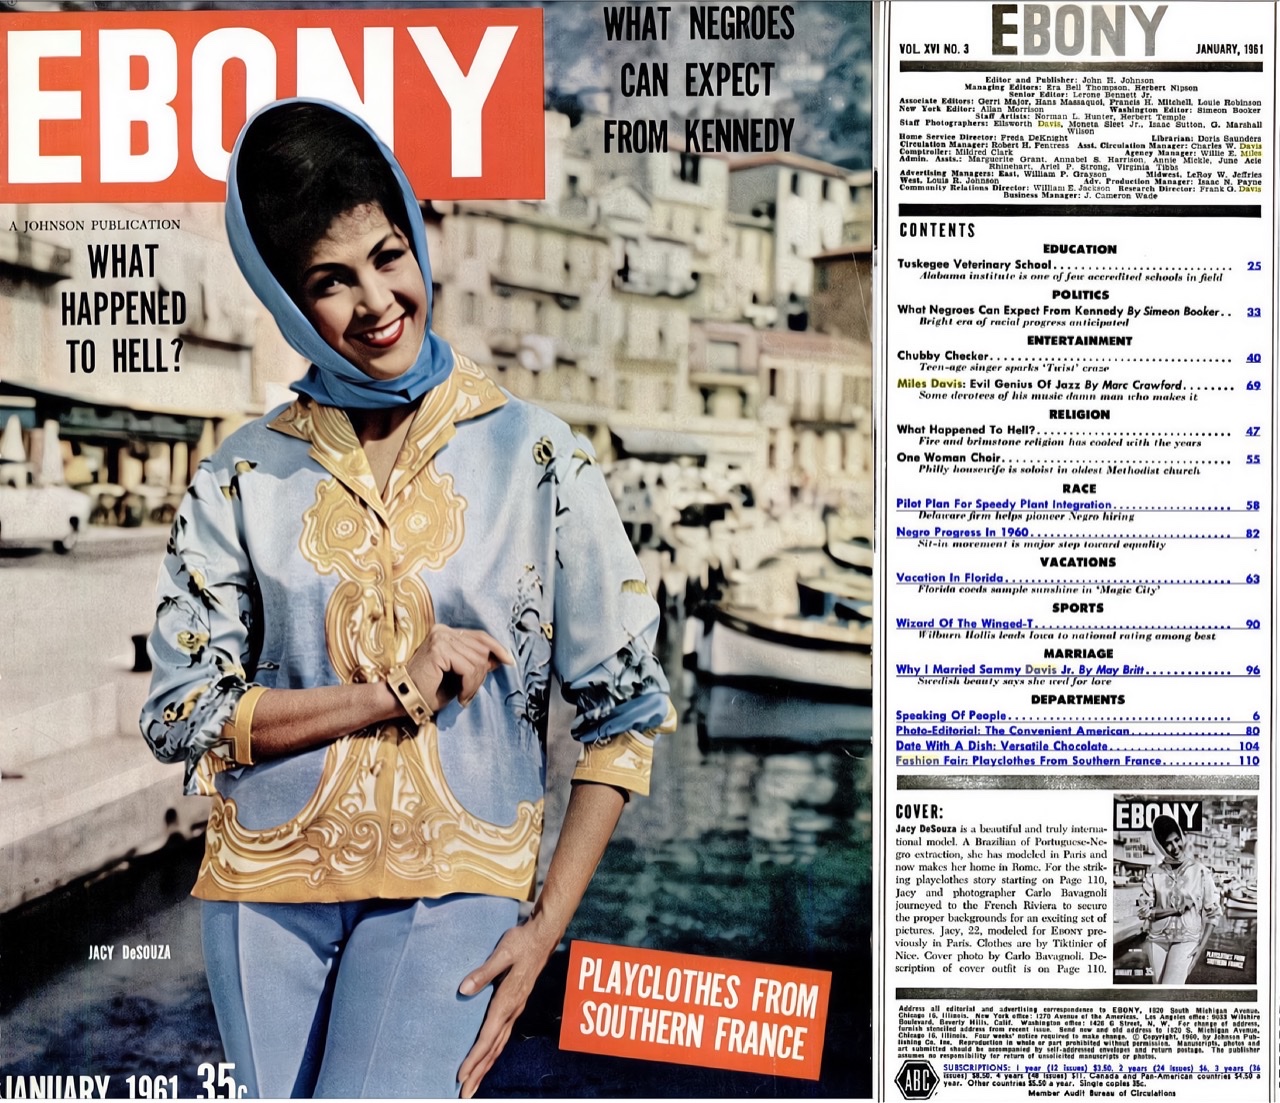 The cover of Ebony magazine from January 1961 of an Afro-American women standing and smiling wearing a blue jump suit and matching blue head scarf with Southern France with boats in the background on the left side and the table of contents on the right side.